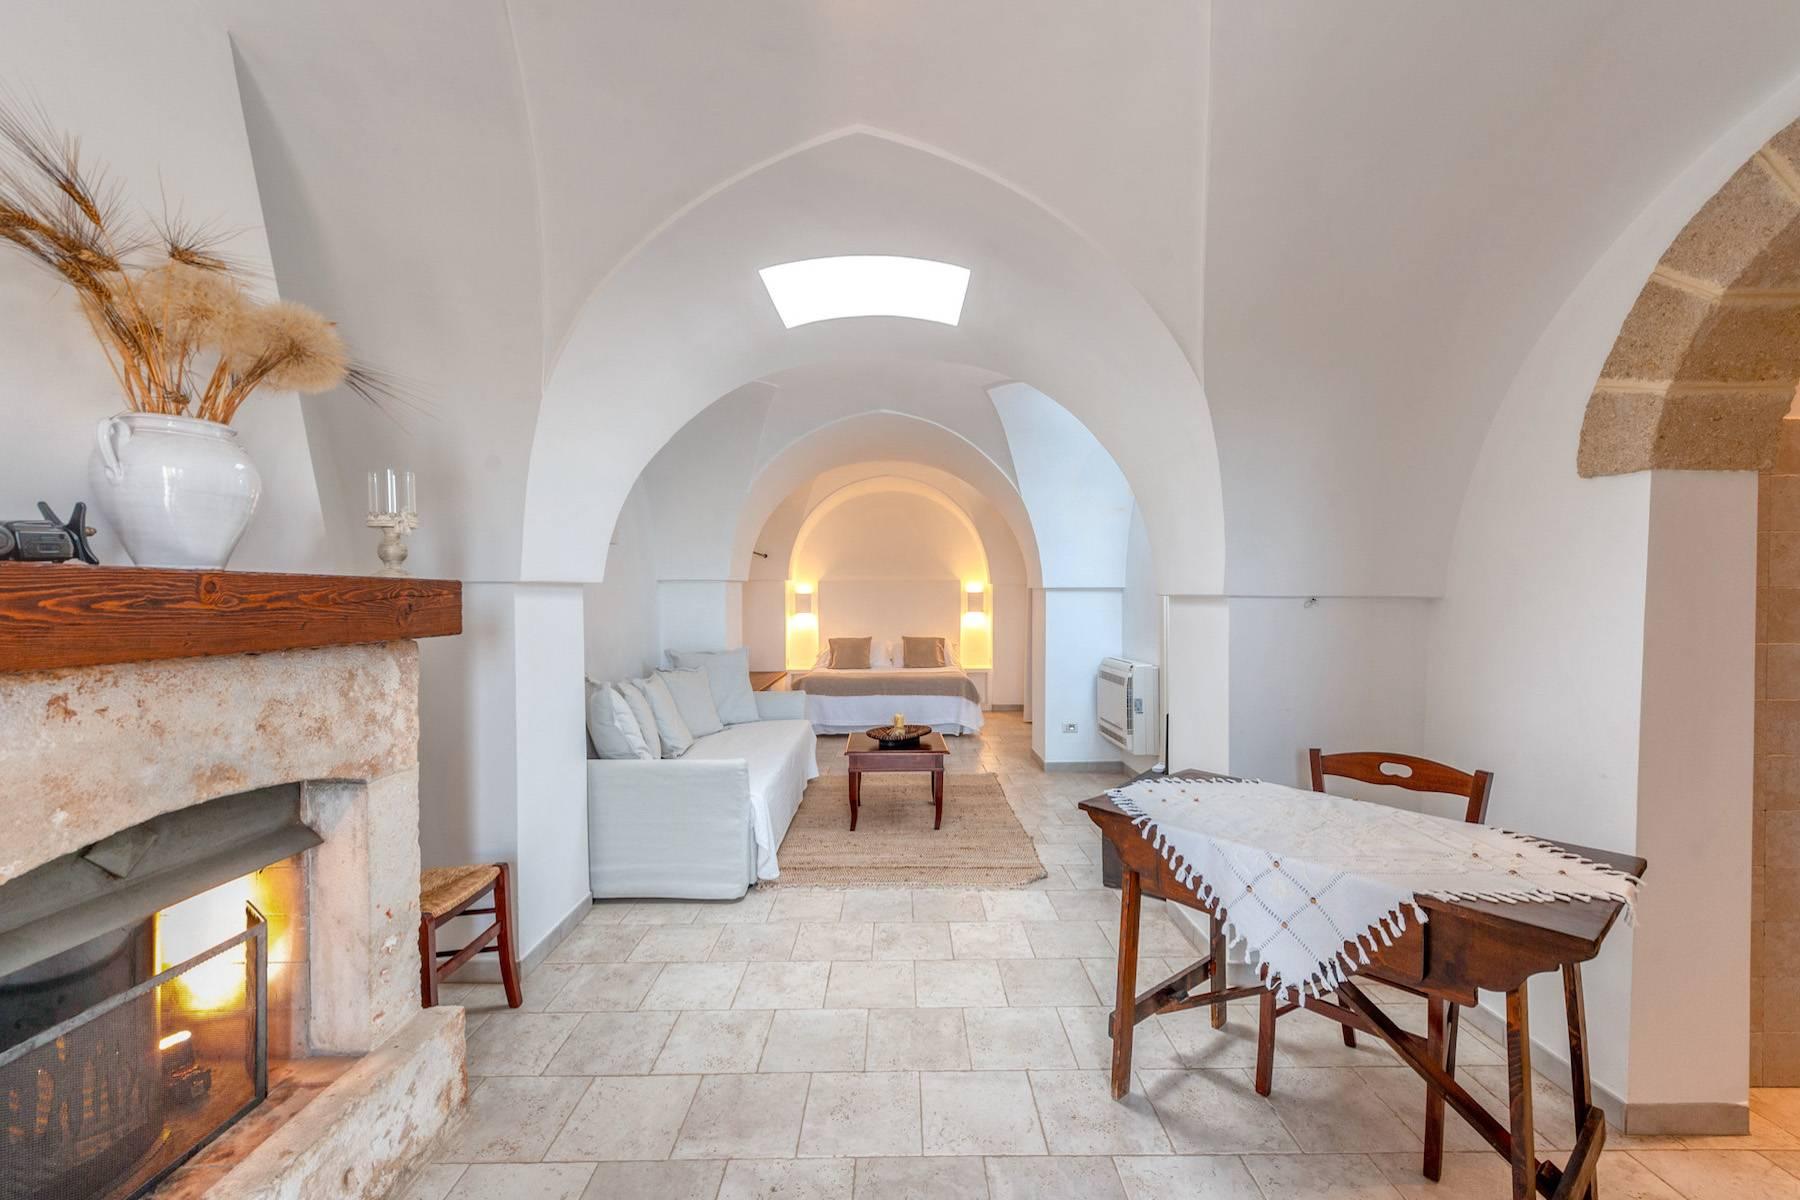 Charming 18th century Masseria surrounded by centuries-old olive trees - 24